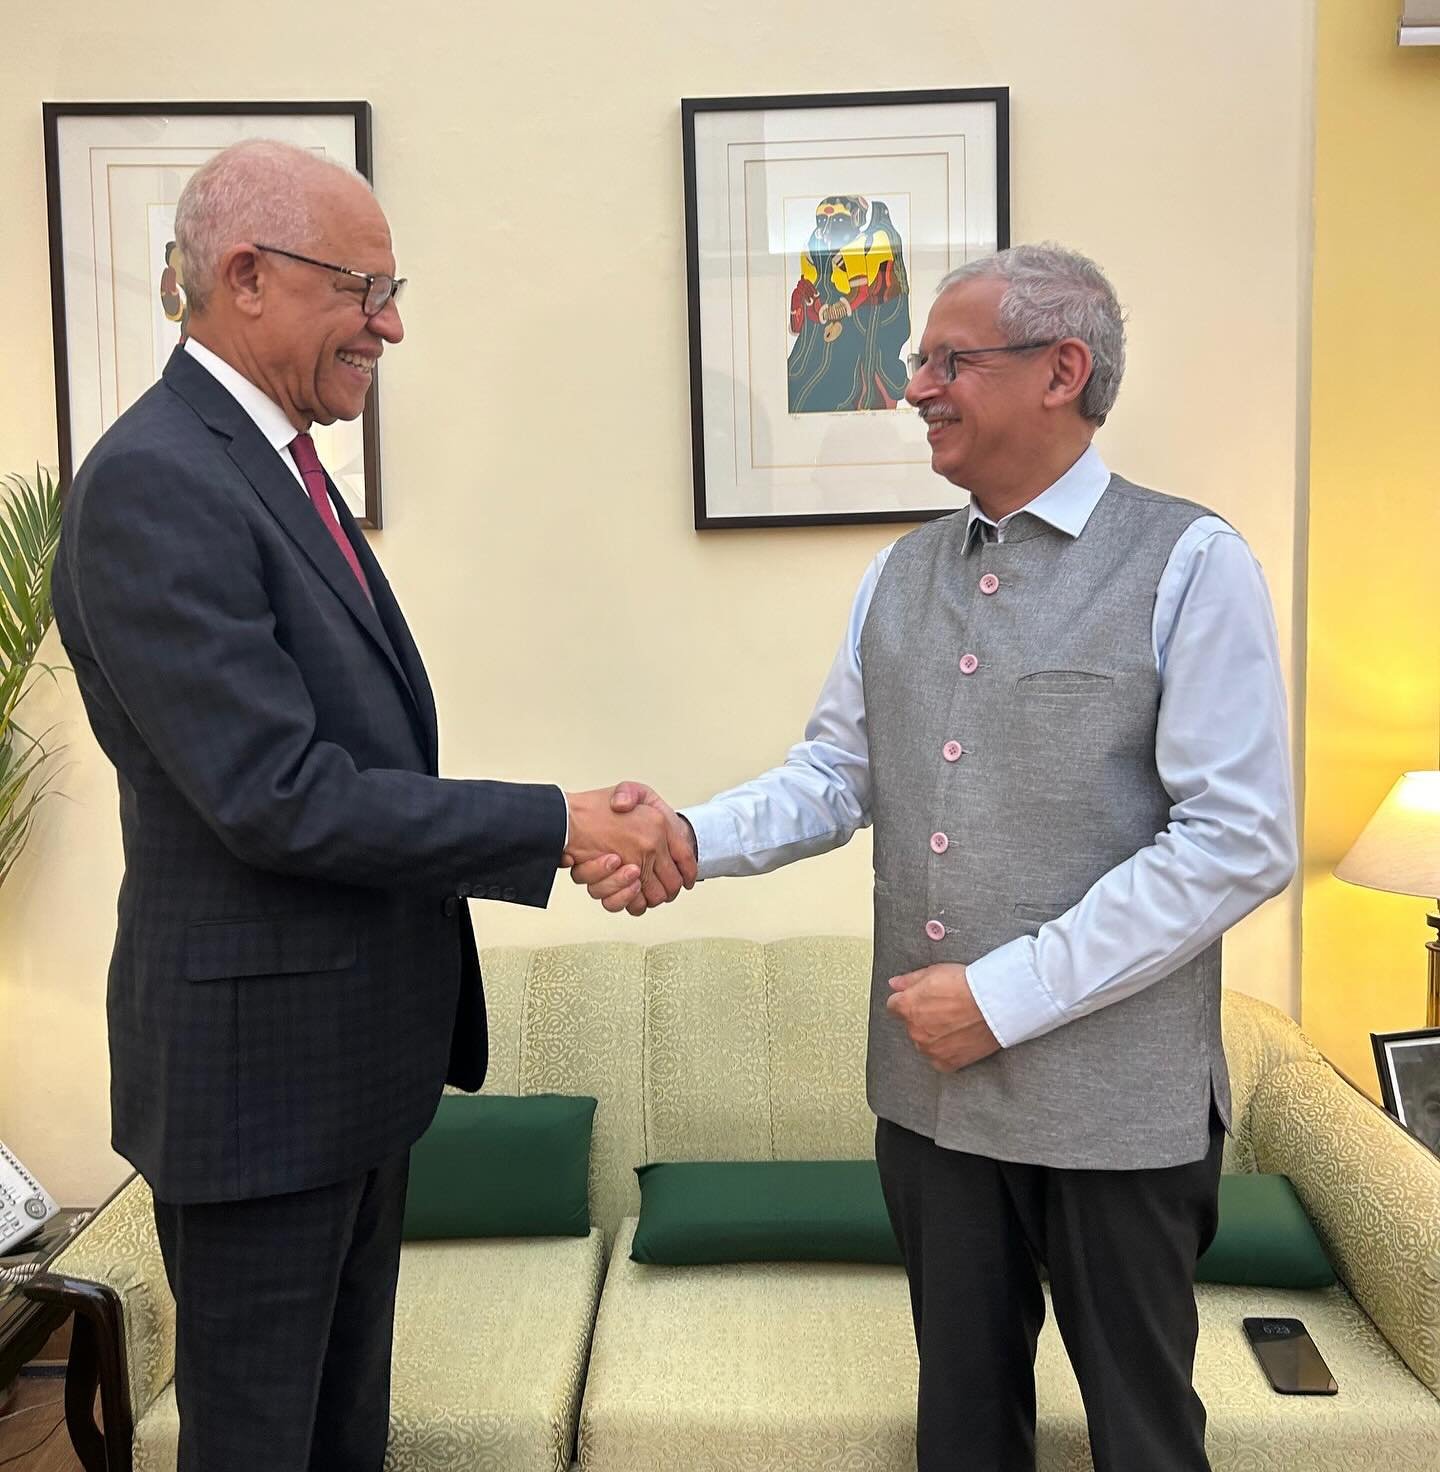 To conclude his work visit to India Vice Minister of @presidenciard Jos&eacute; Ram&oacute;n Holguin Brito paid a courtesy visit to the Secreatary East @meaindia Jaydeep Mazumdar. During the meeting they exchanged about the growing engagements of the